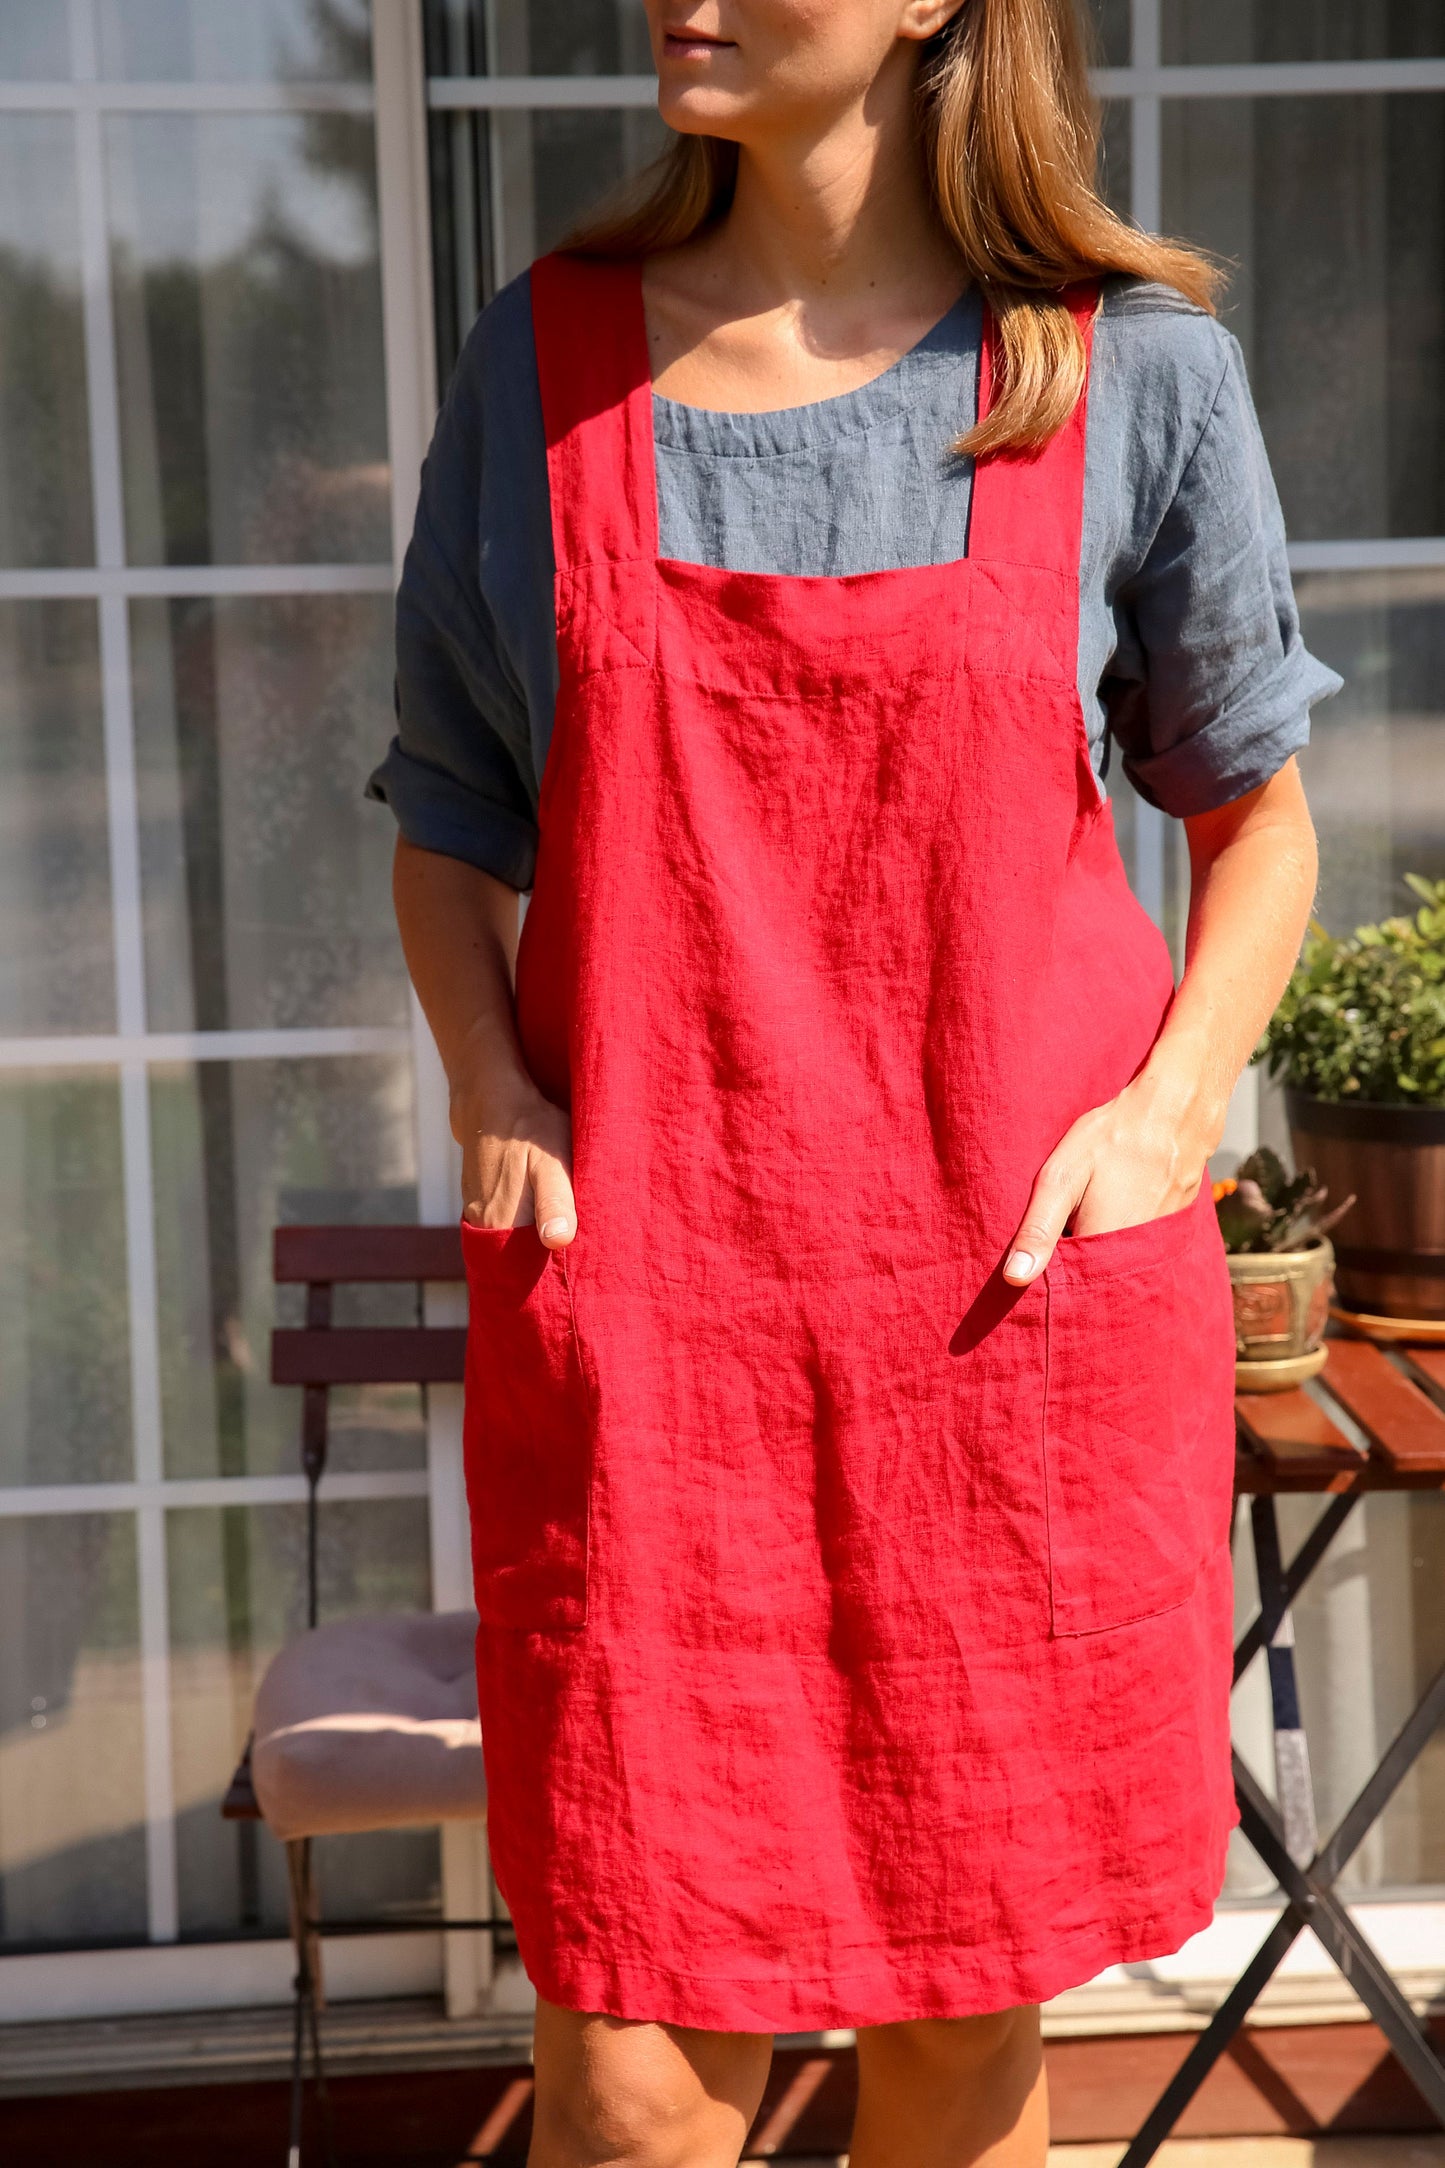 Festive red apron made from 100% European flax, perfect for holiday cooking